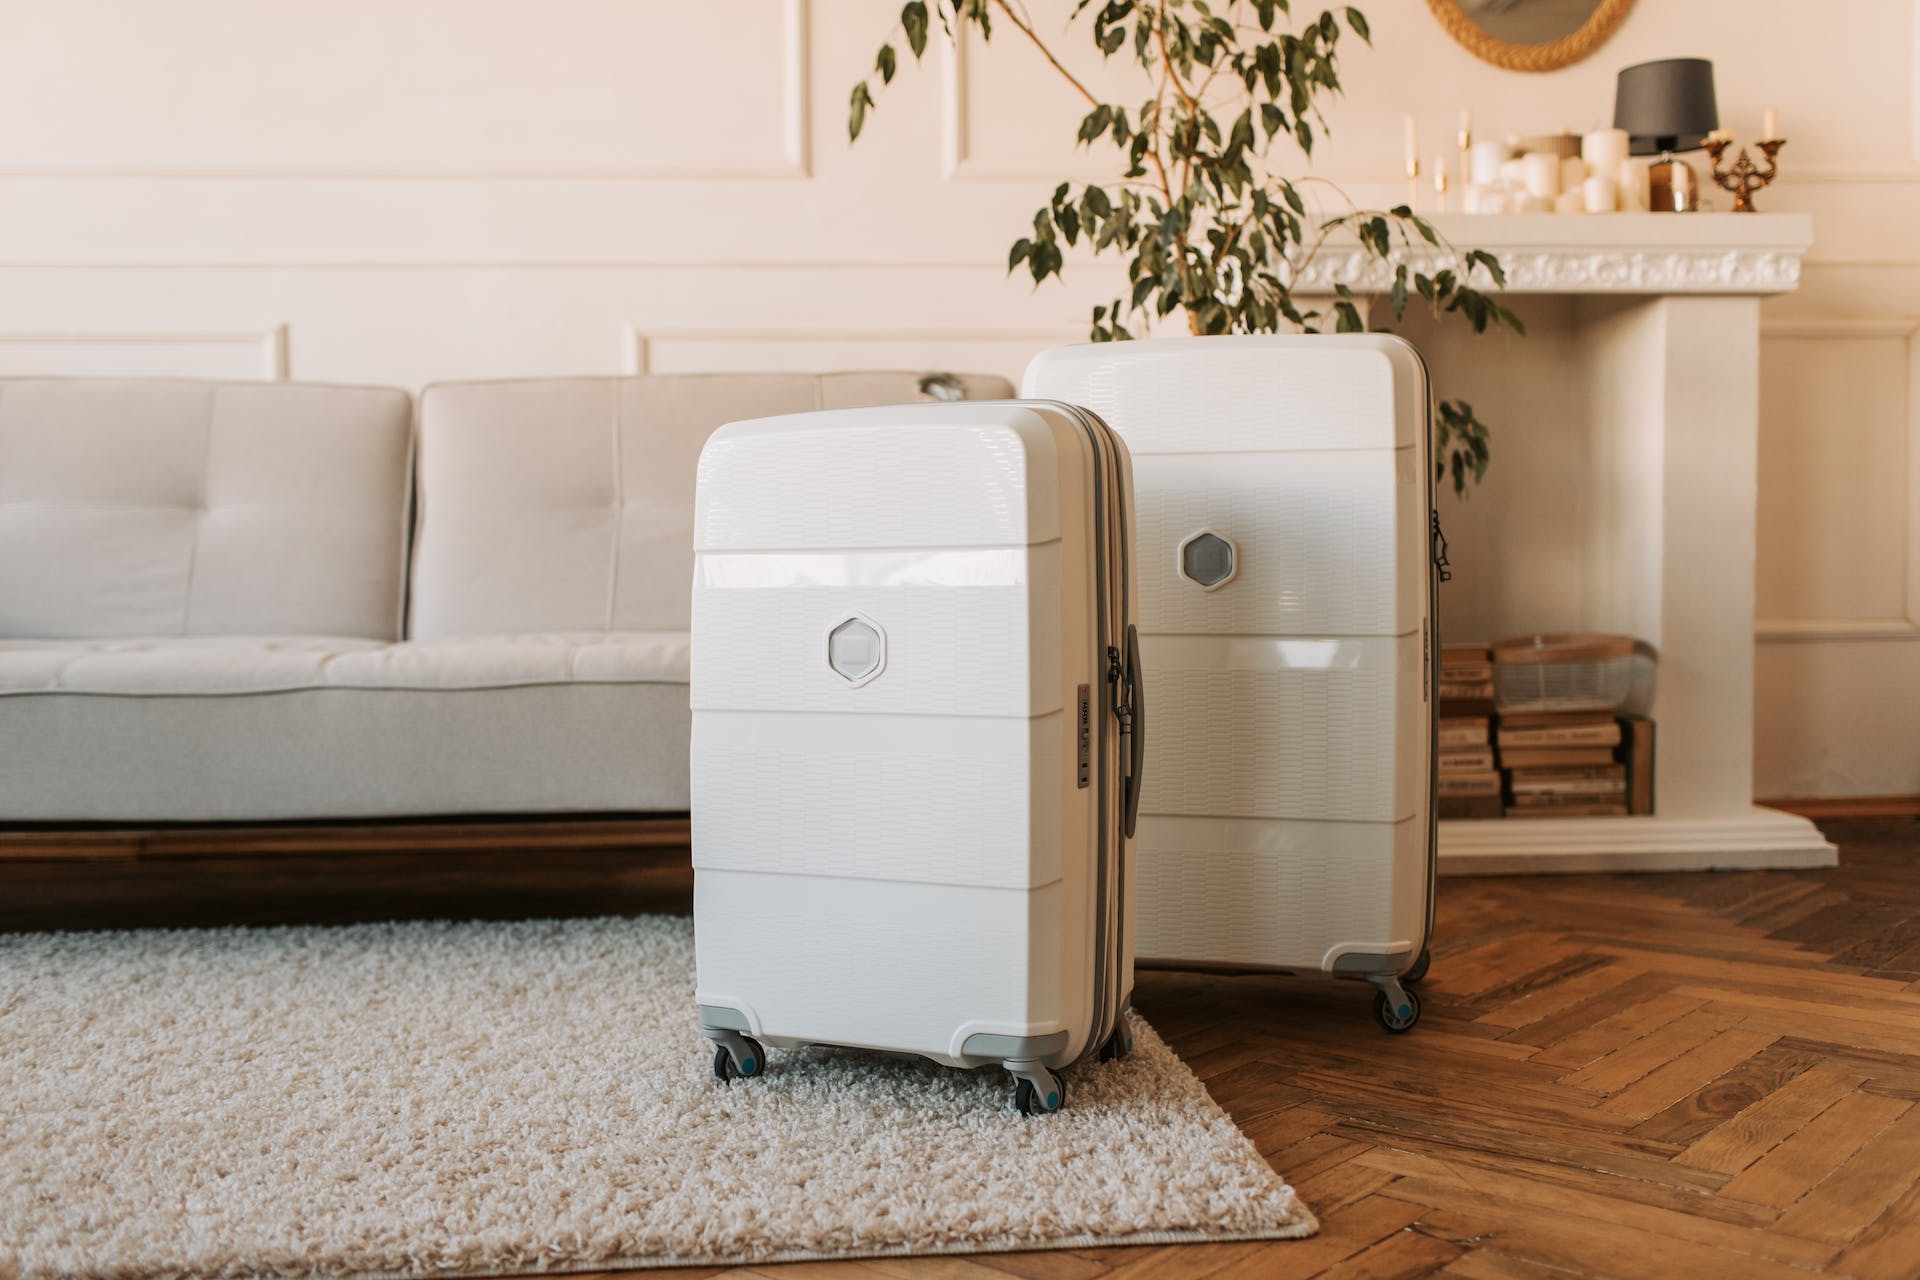 Two white packed suitcases | Source: Pexels